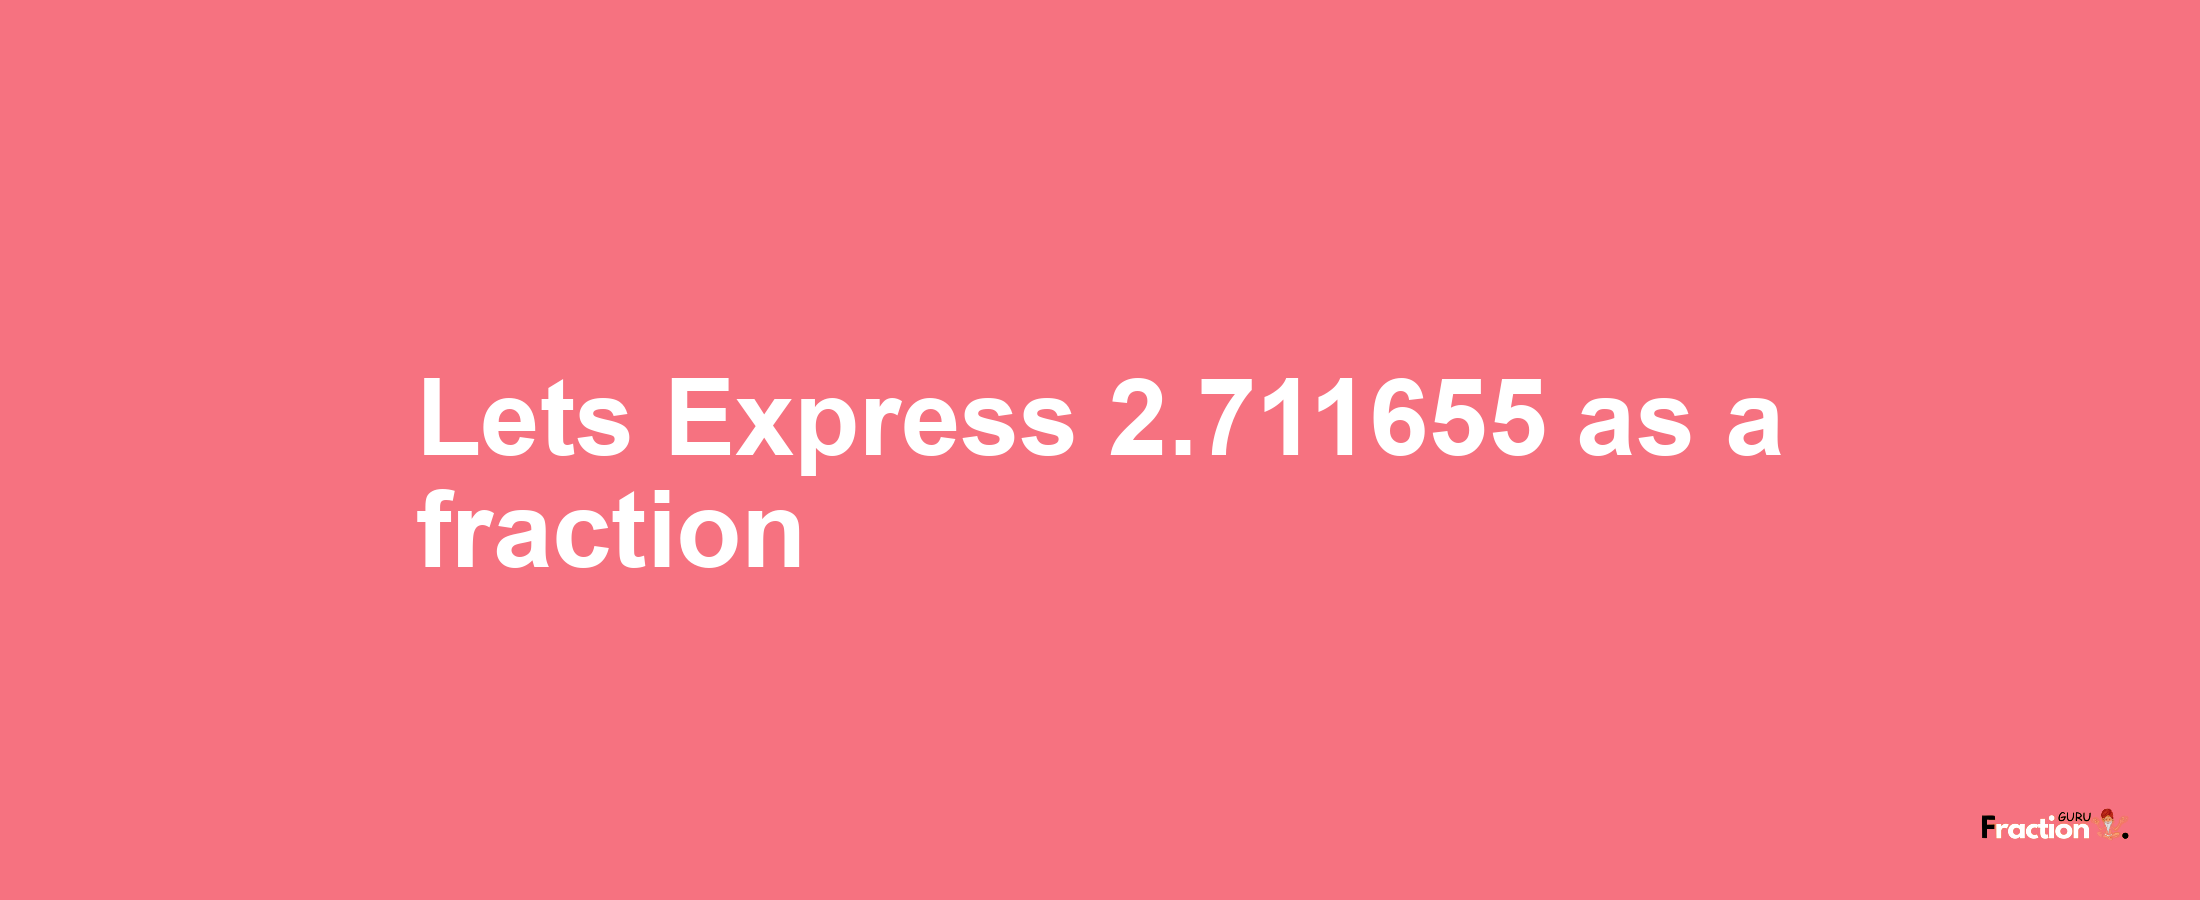 Lets Express 2.711655 as afraction